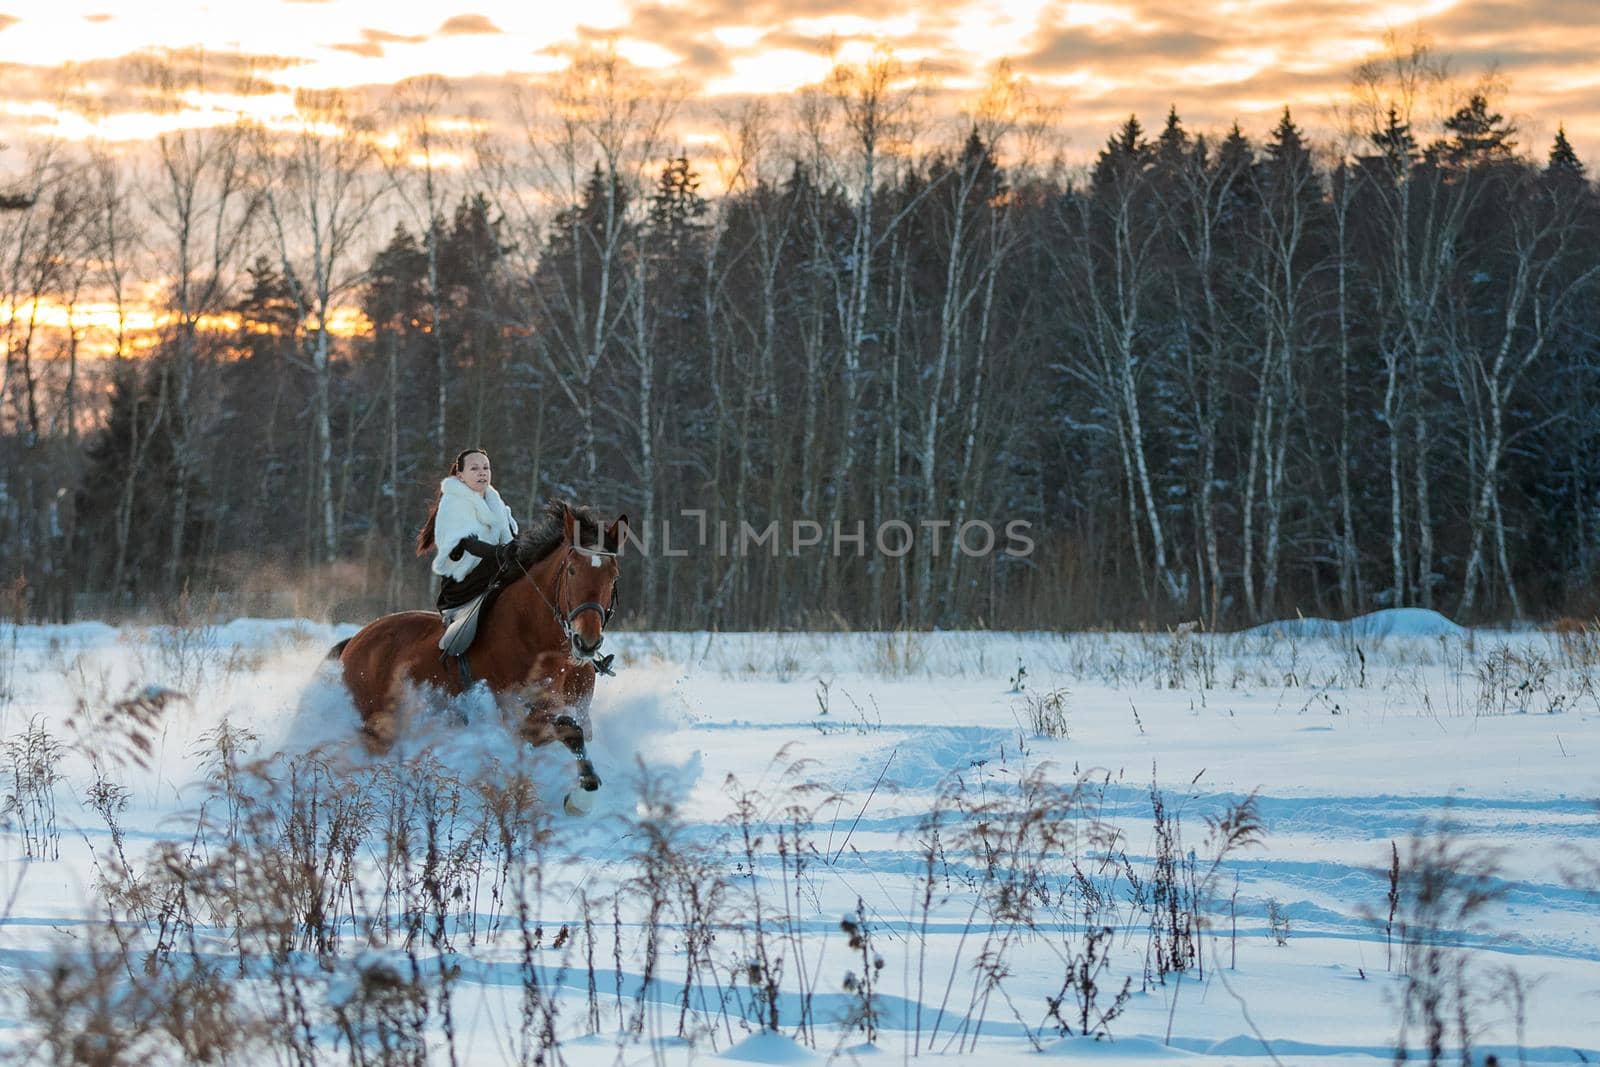 A girl in a white cloak rides a brown horse in winter. Golden hour, setting sun.